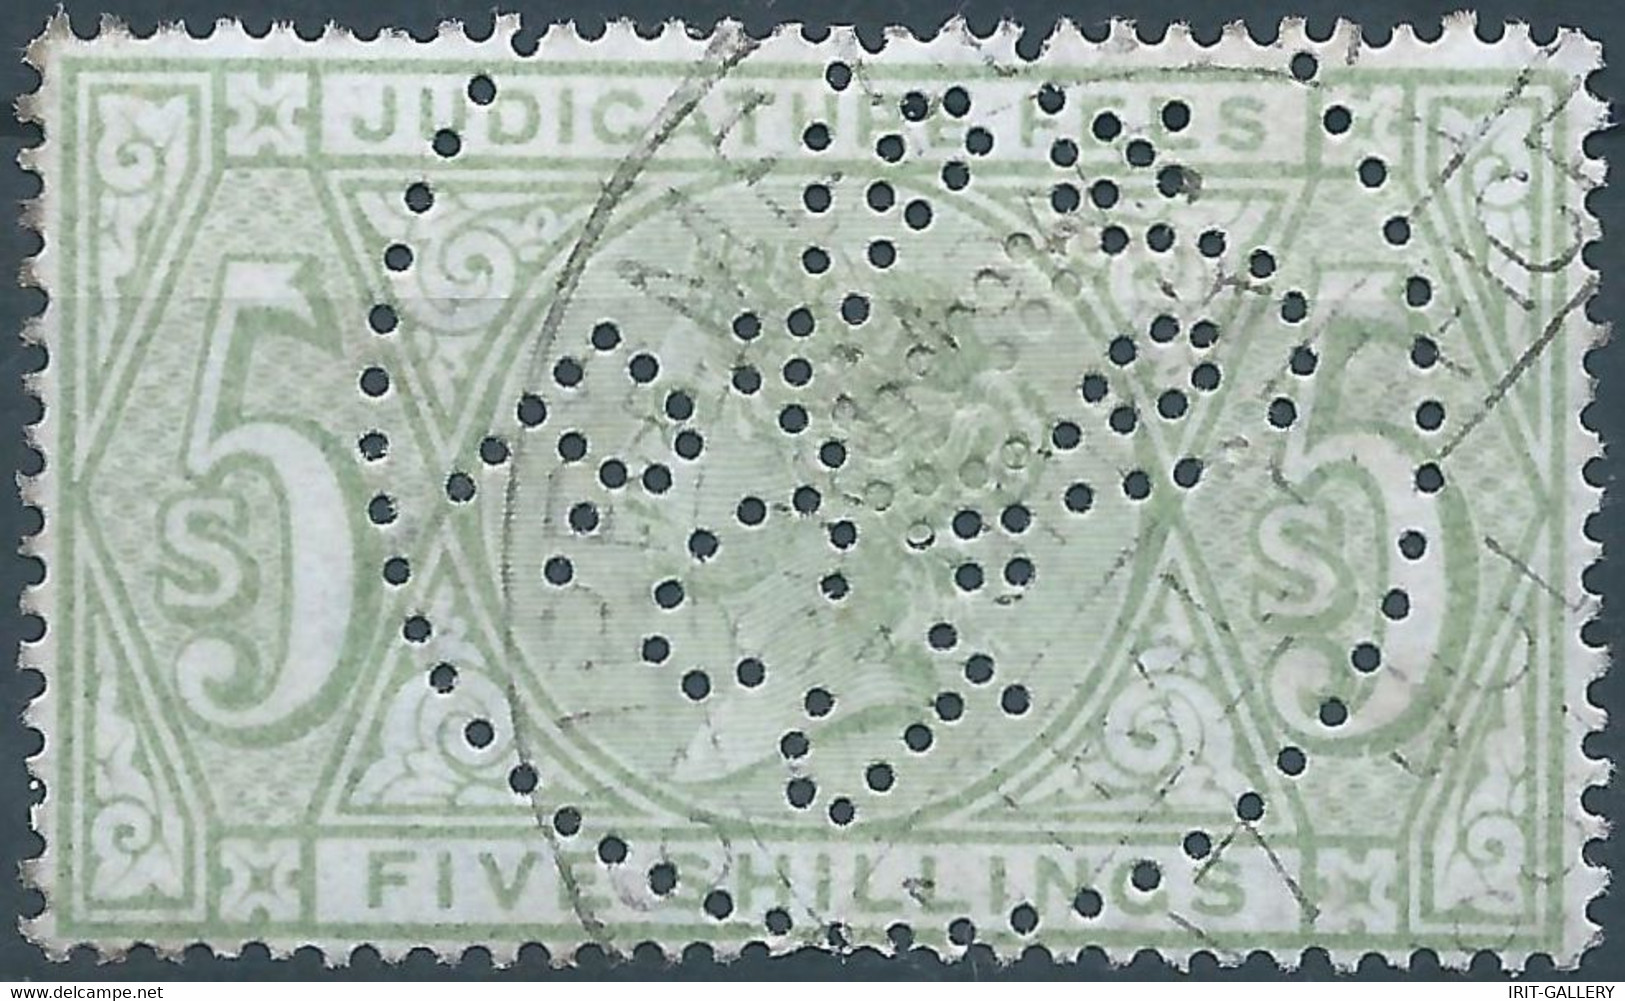 Great Britain-ENGLAND,Queen Victoria,1870-1800 Revenue Stamp Tax Fiscal,JUDICATURE FEES,5 Shillings,PERFIN - Used - Fiscale Zegels